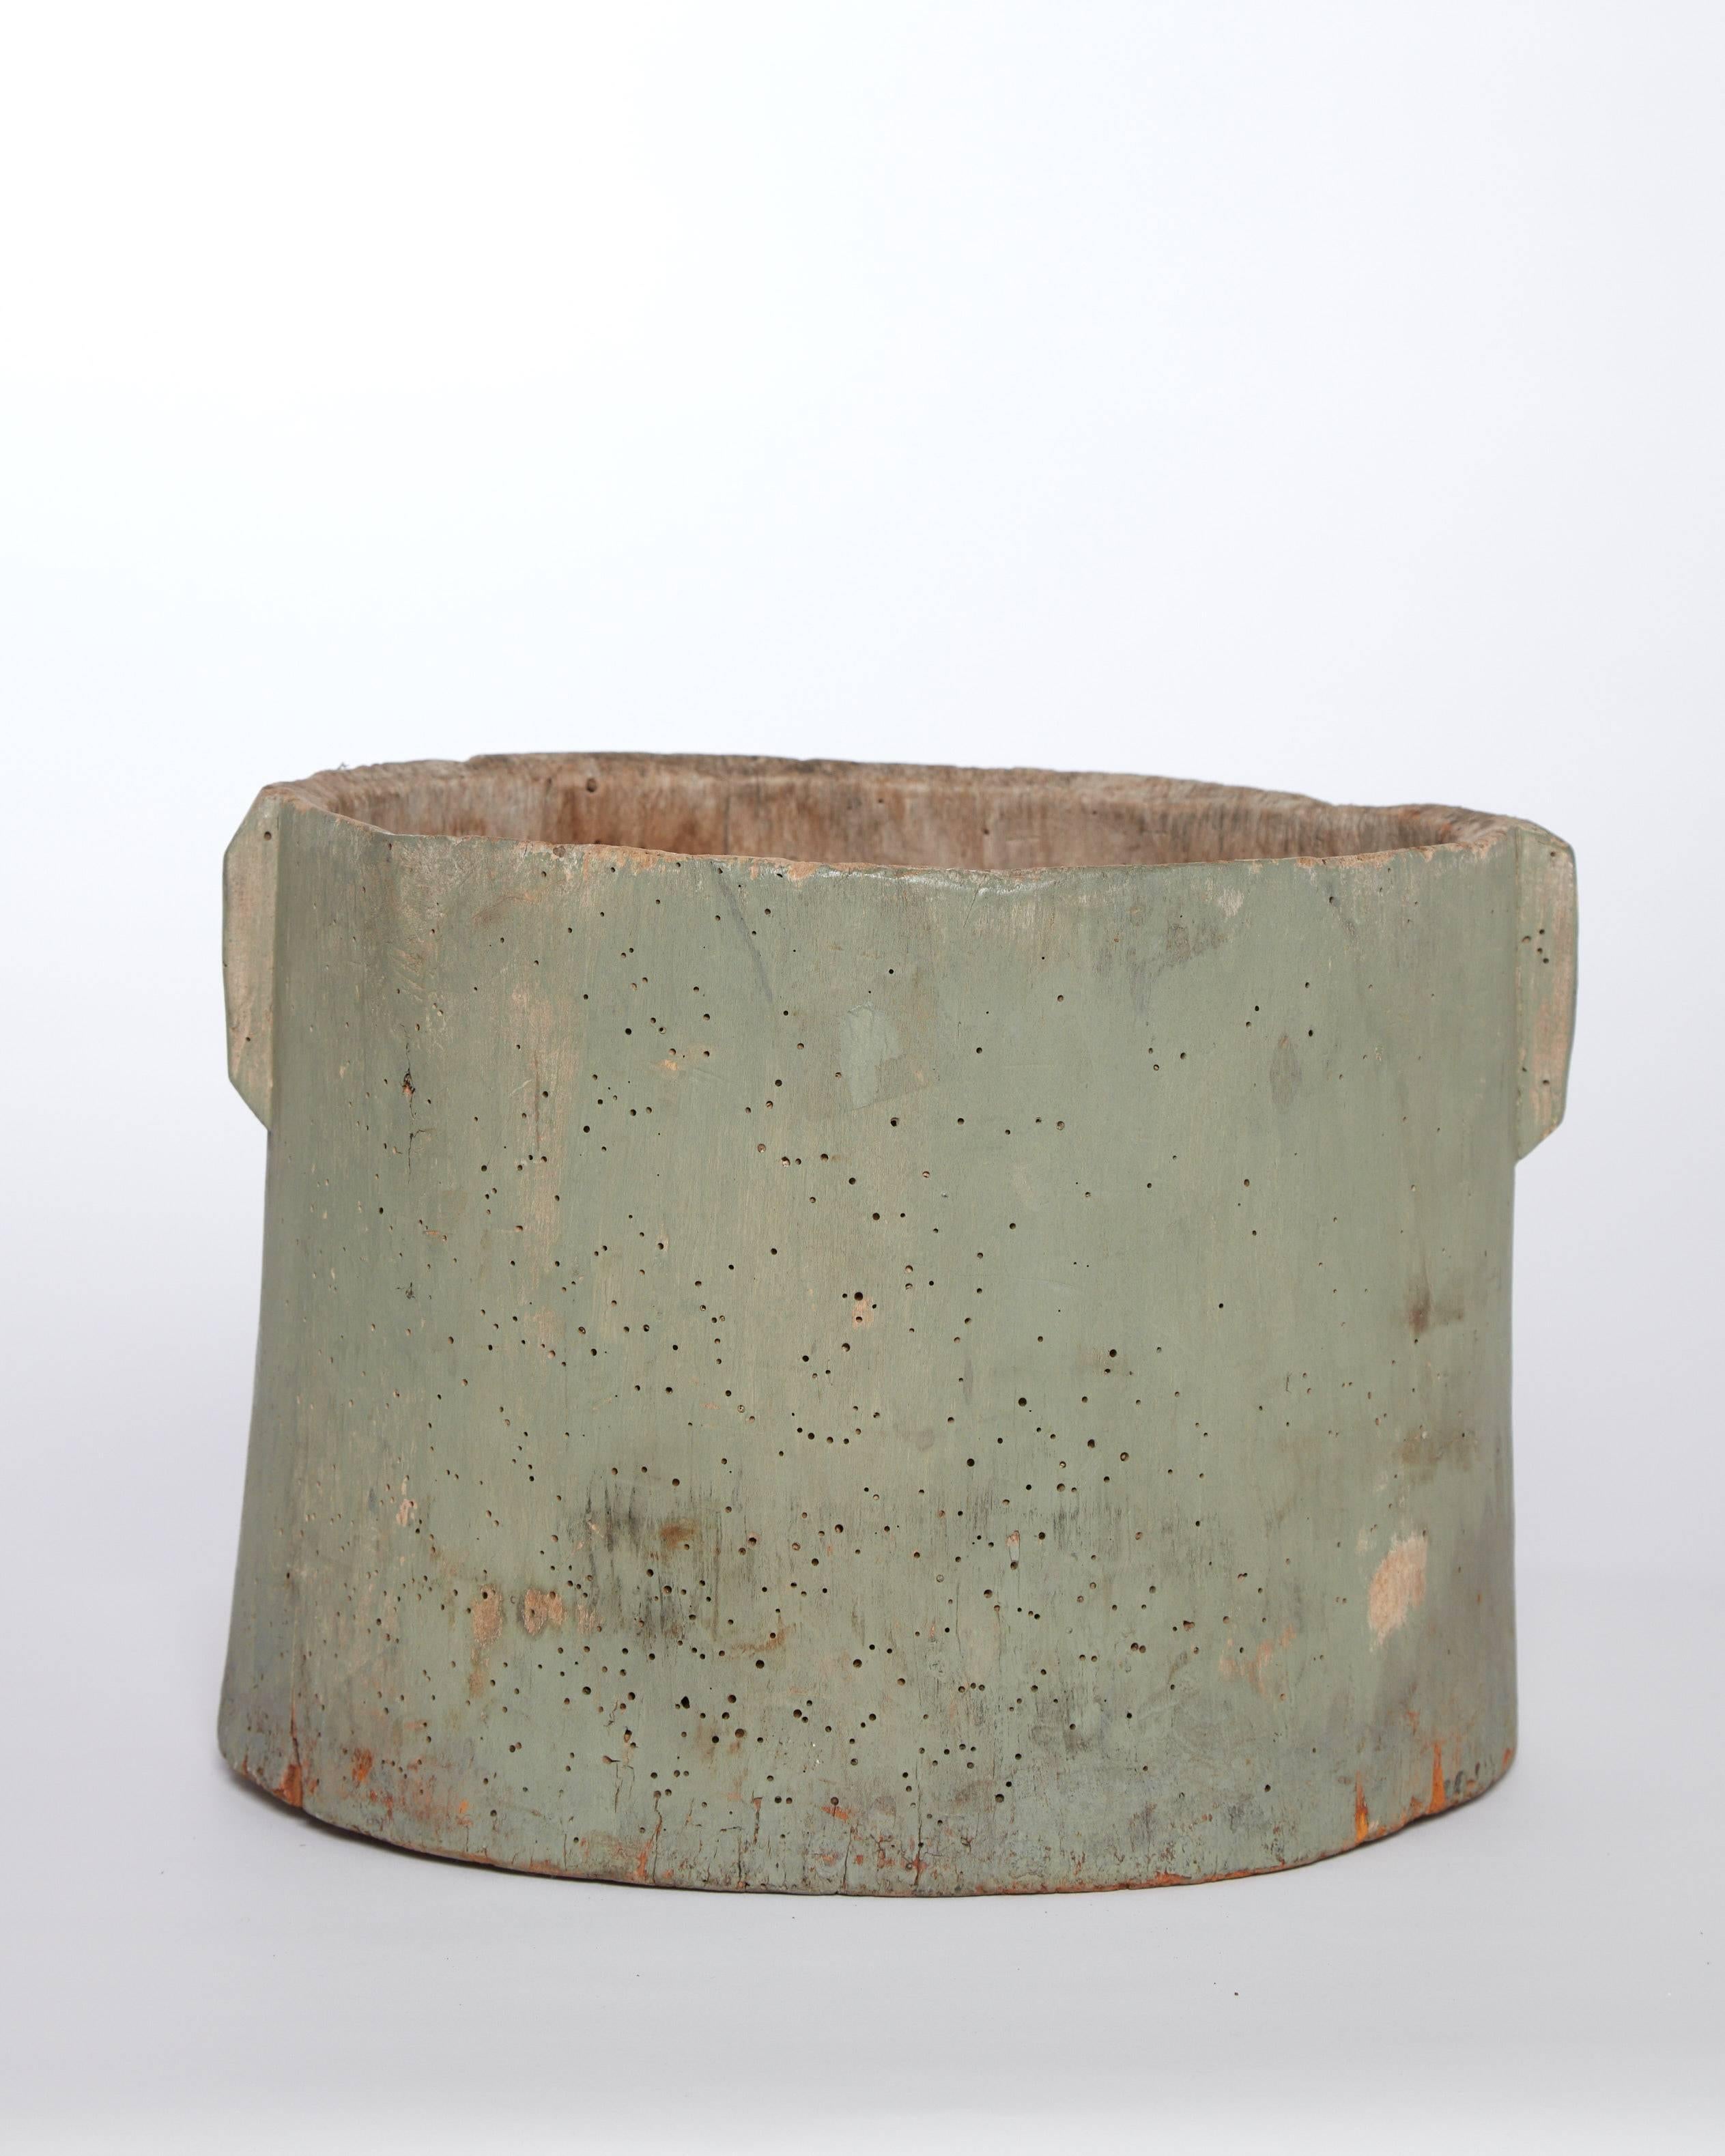 Early 20th century American stamped 'MS' wooden vessel with two handles 
Milk painted a soft green color.
 